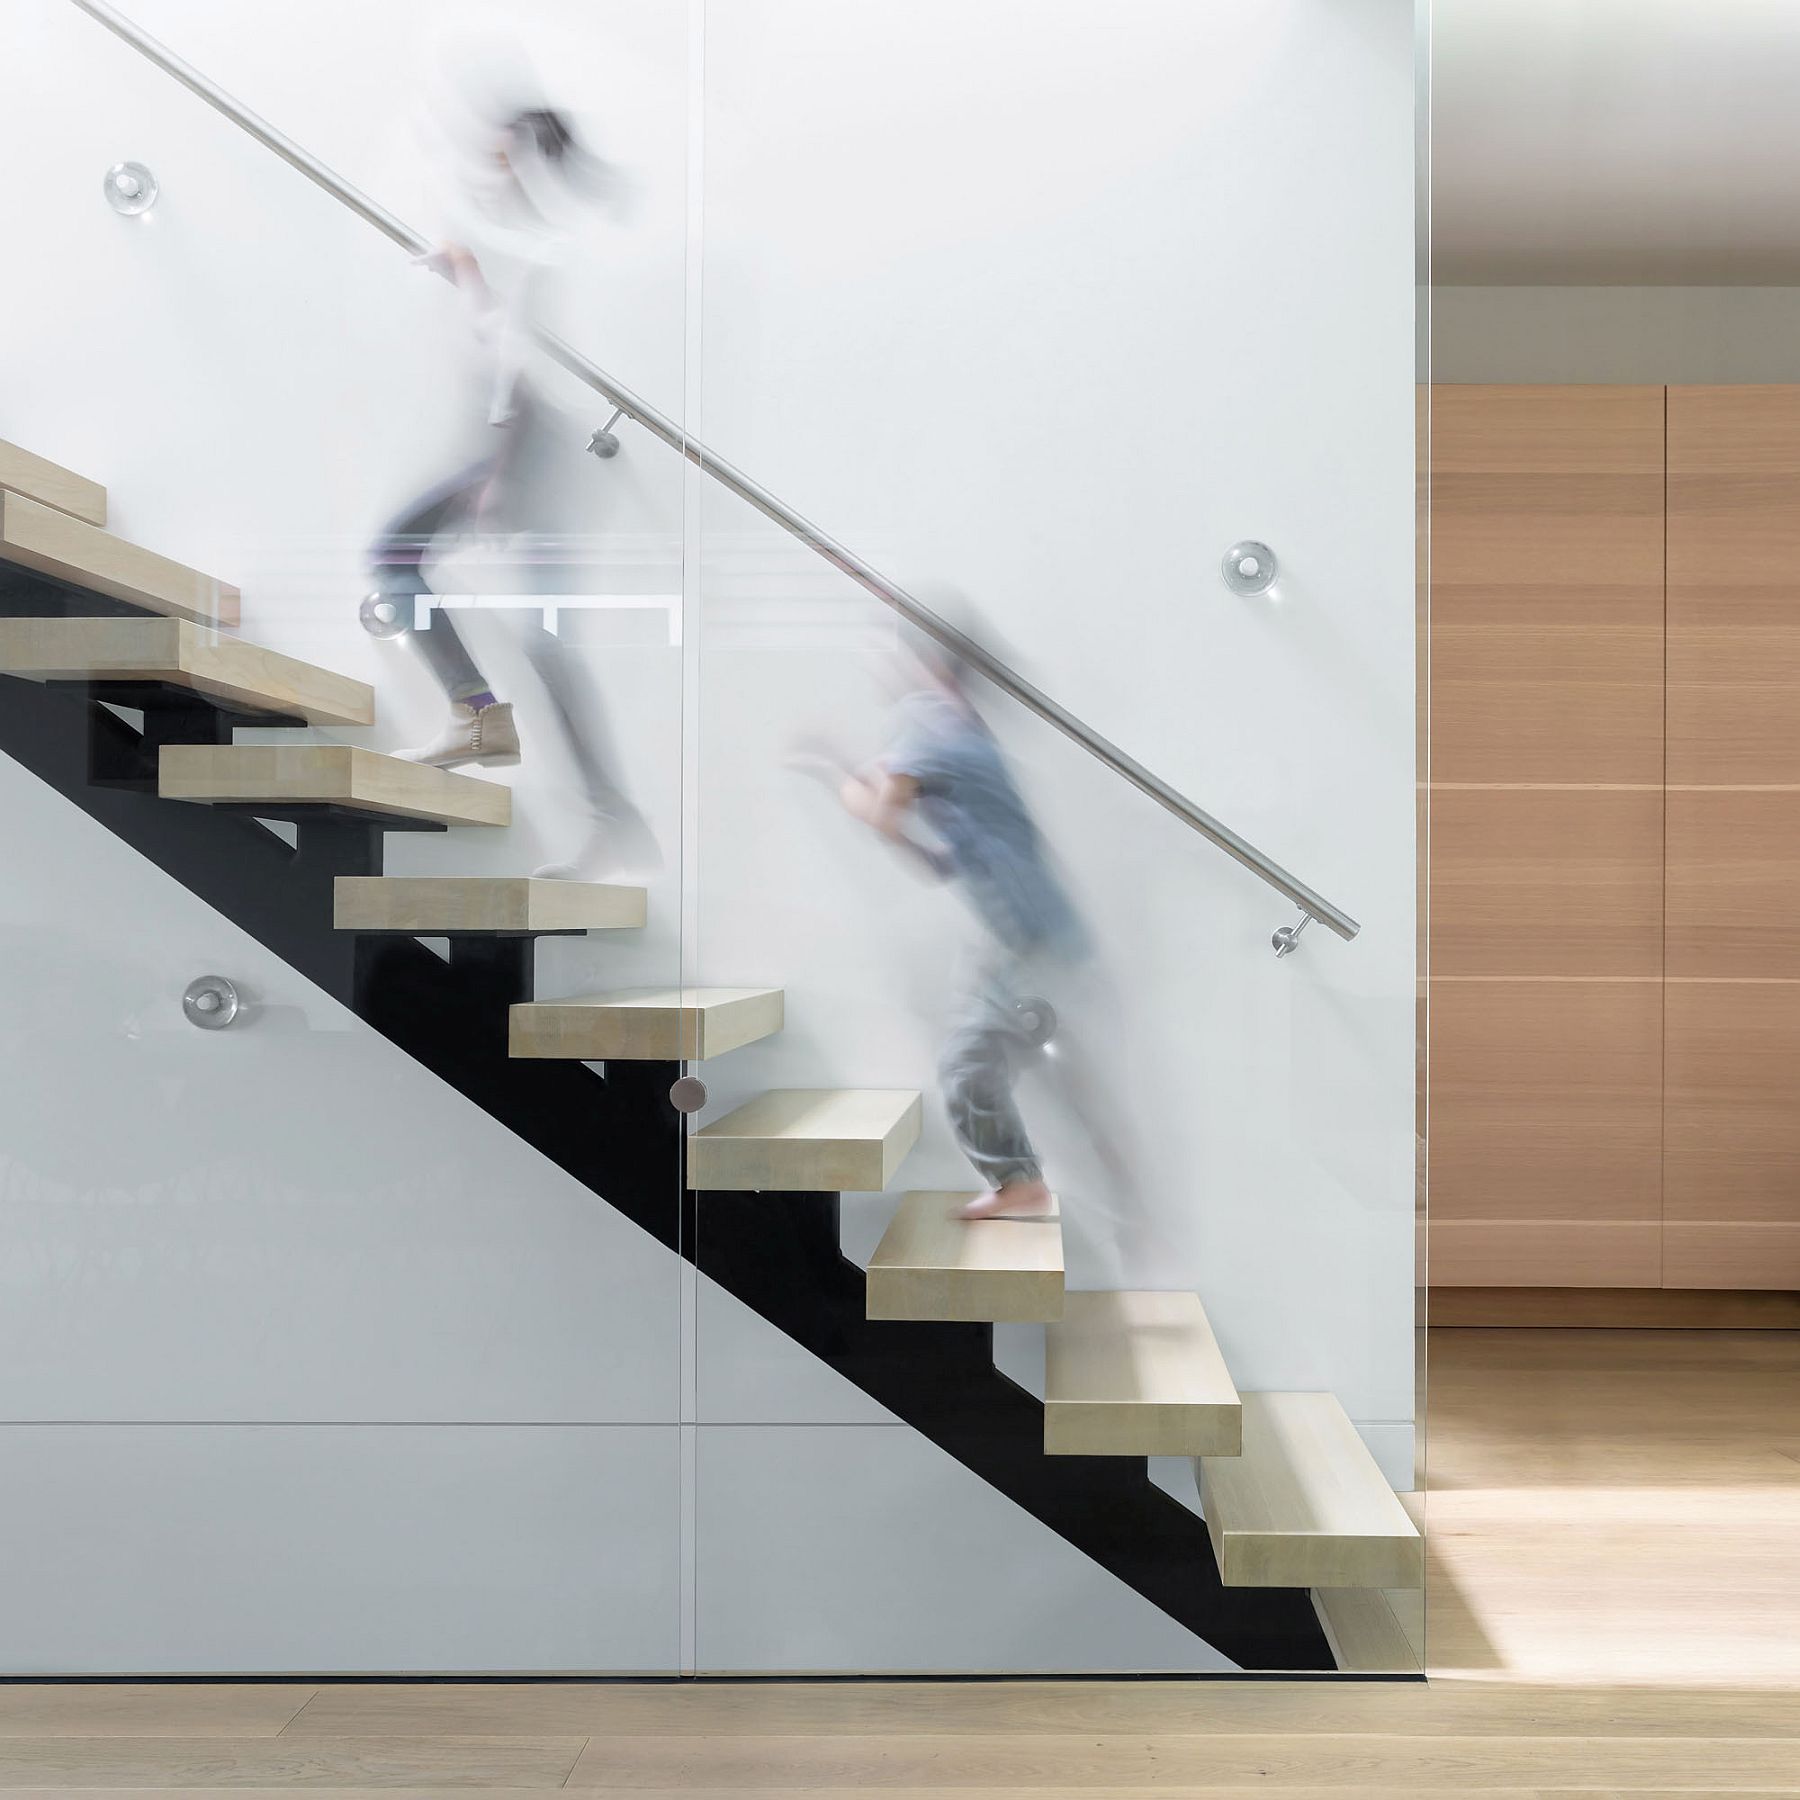 Glass balustrade and floating risers create a fabulous, sculptural stairway